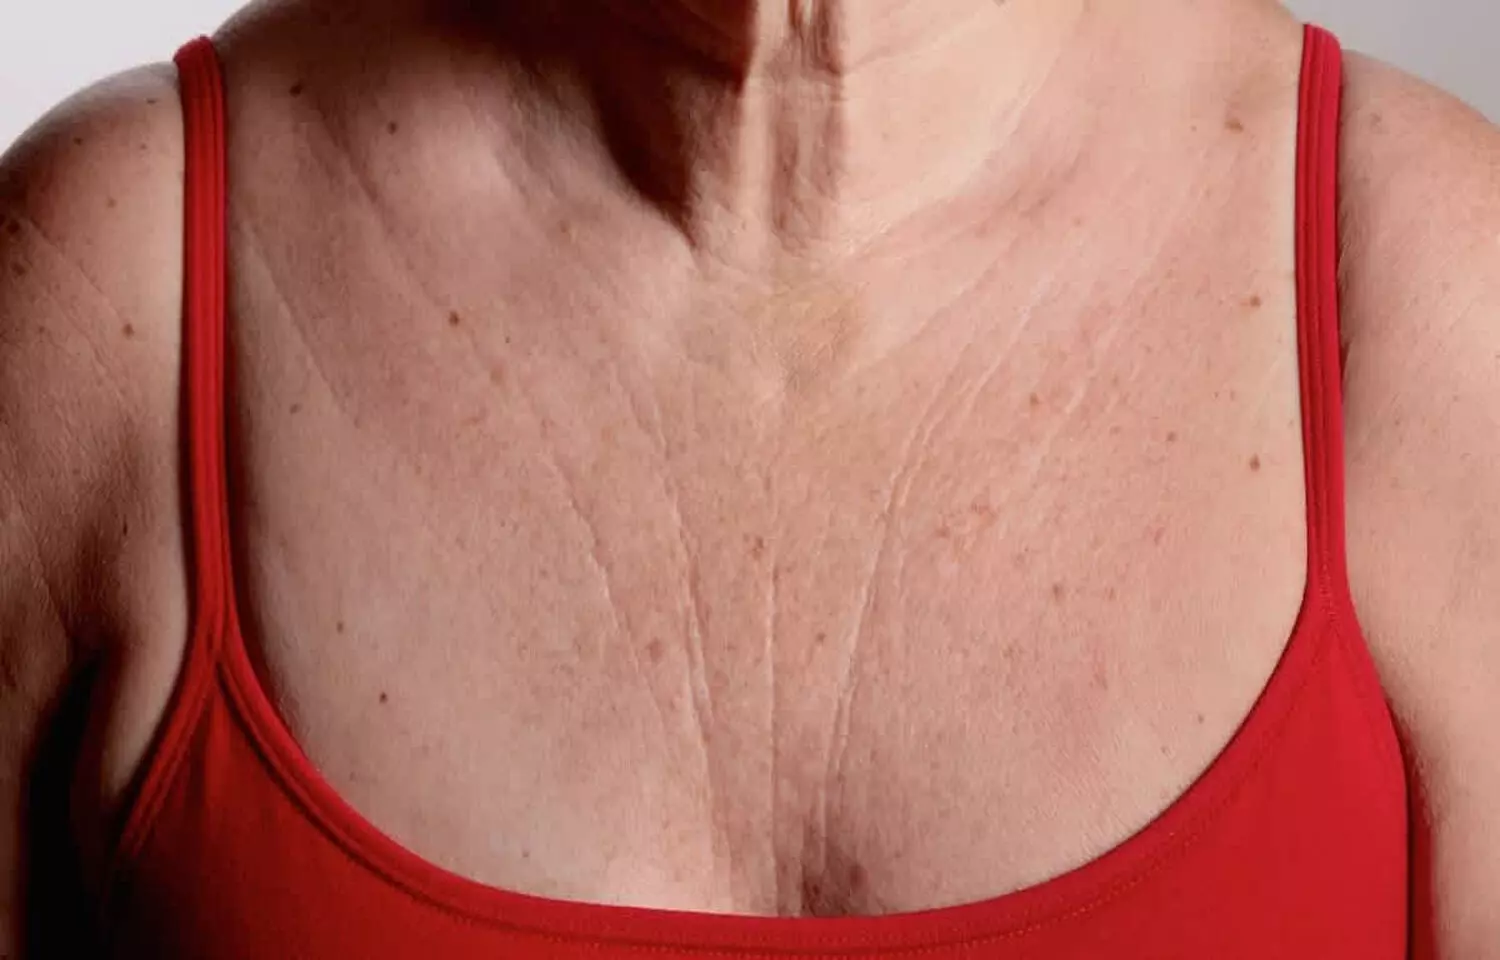 Calcium hydroxylapatite helps improve chest wrinkles in women: Study